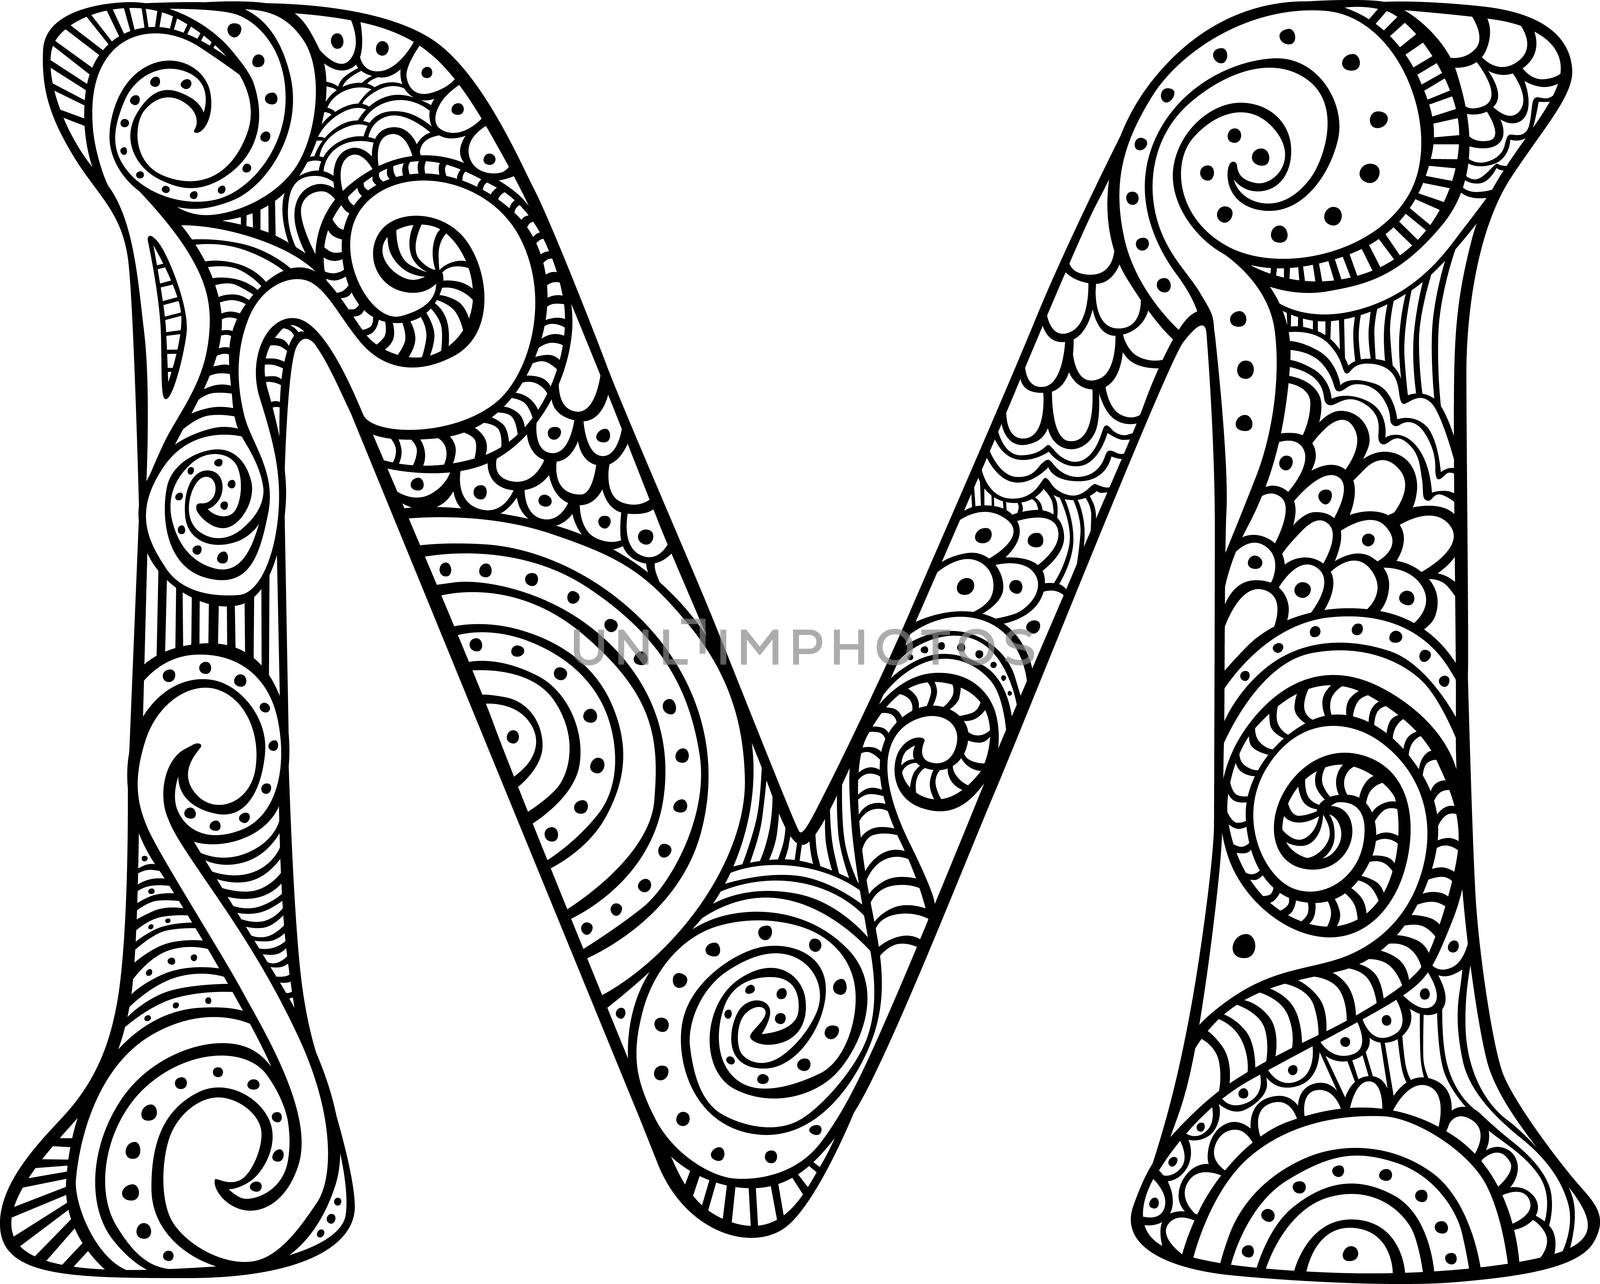 Hand drawn capital letter M in black - coloring sheet for adults